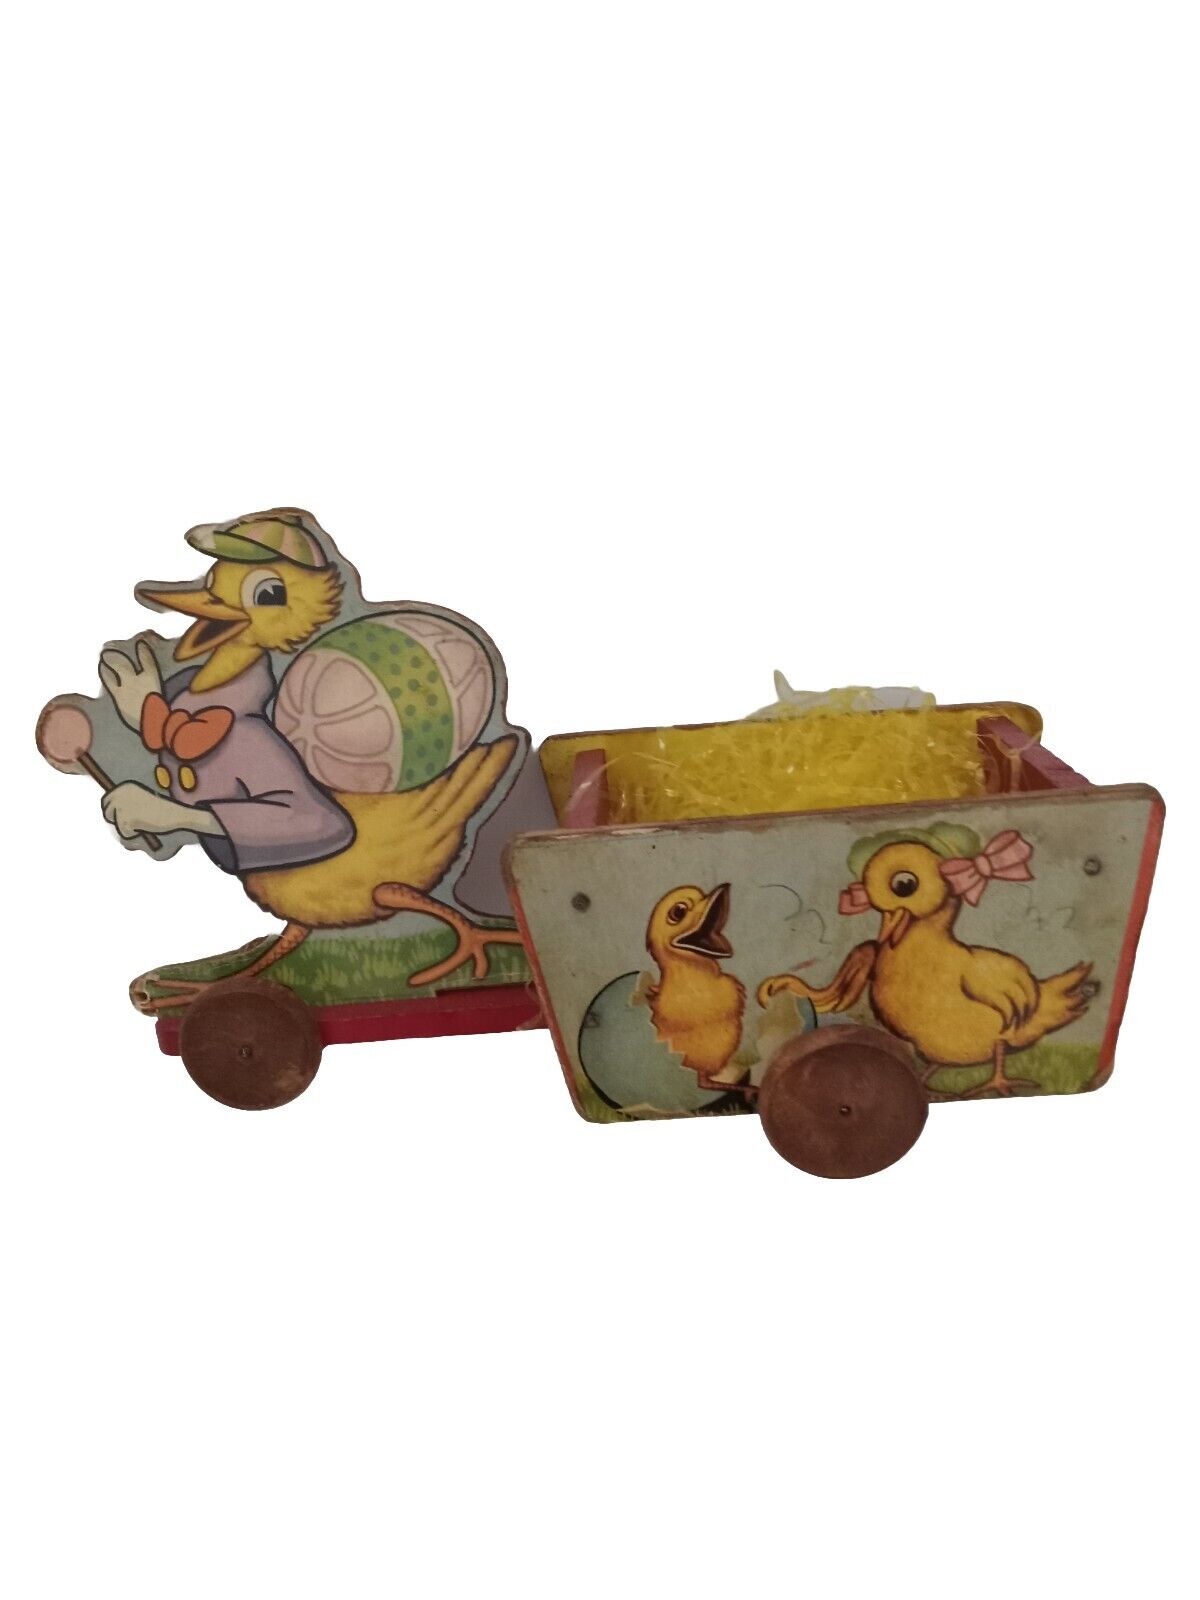 VTG WOODEN 1940's - 1950's PULL TOY EASTER DUCK PULLING CART STEVEN TOY - AS IS 